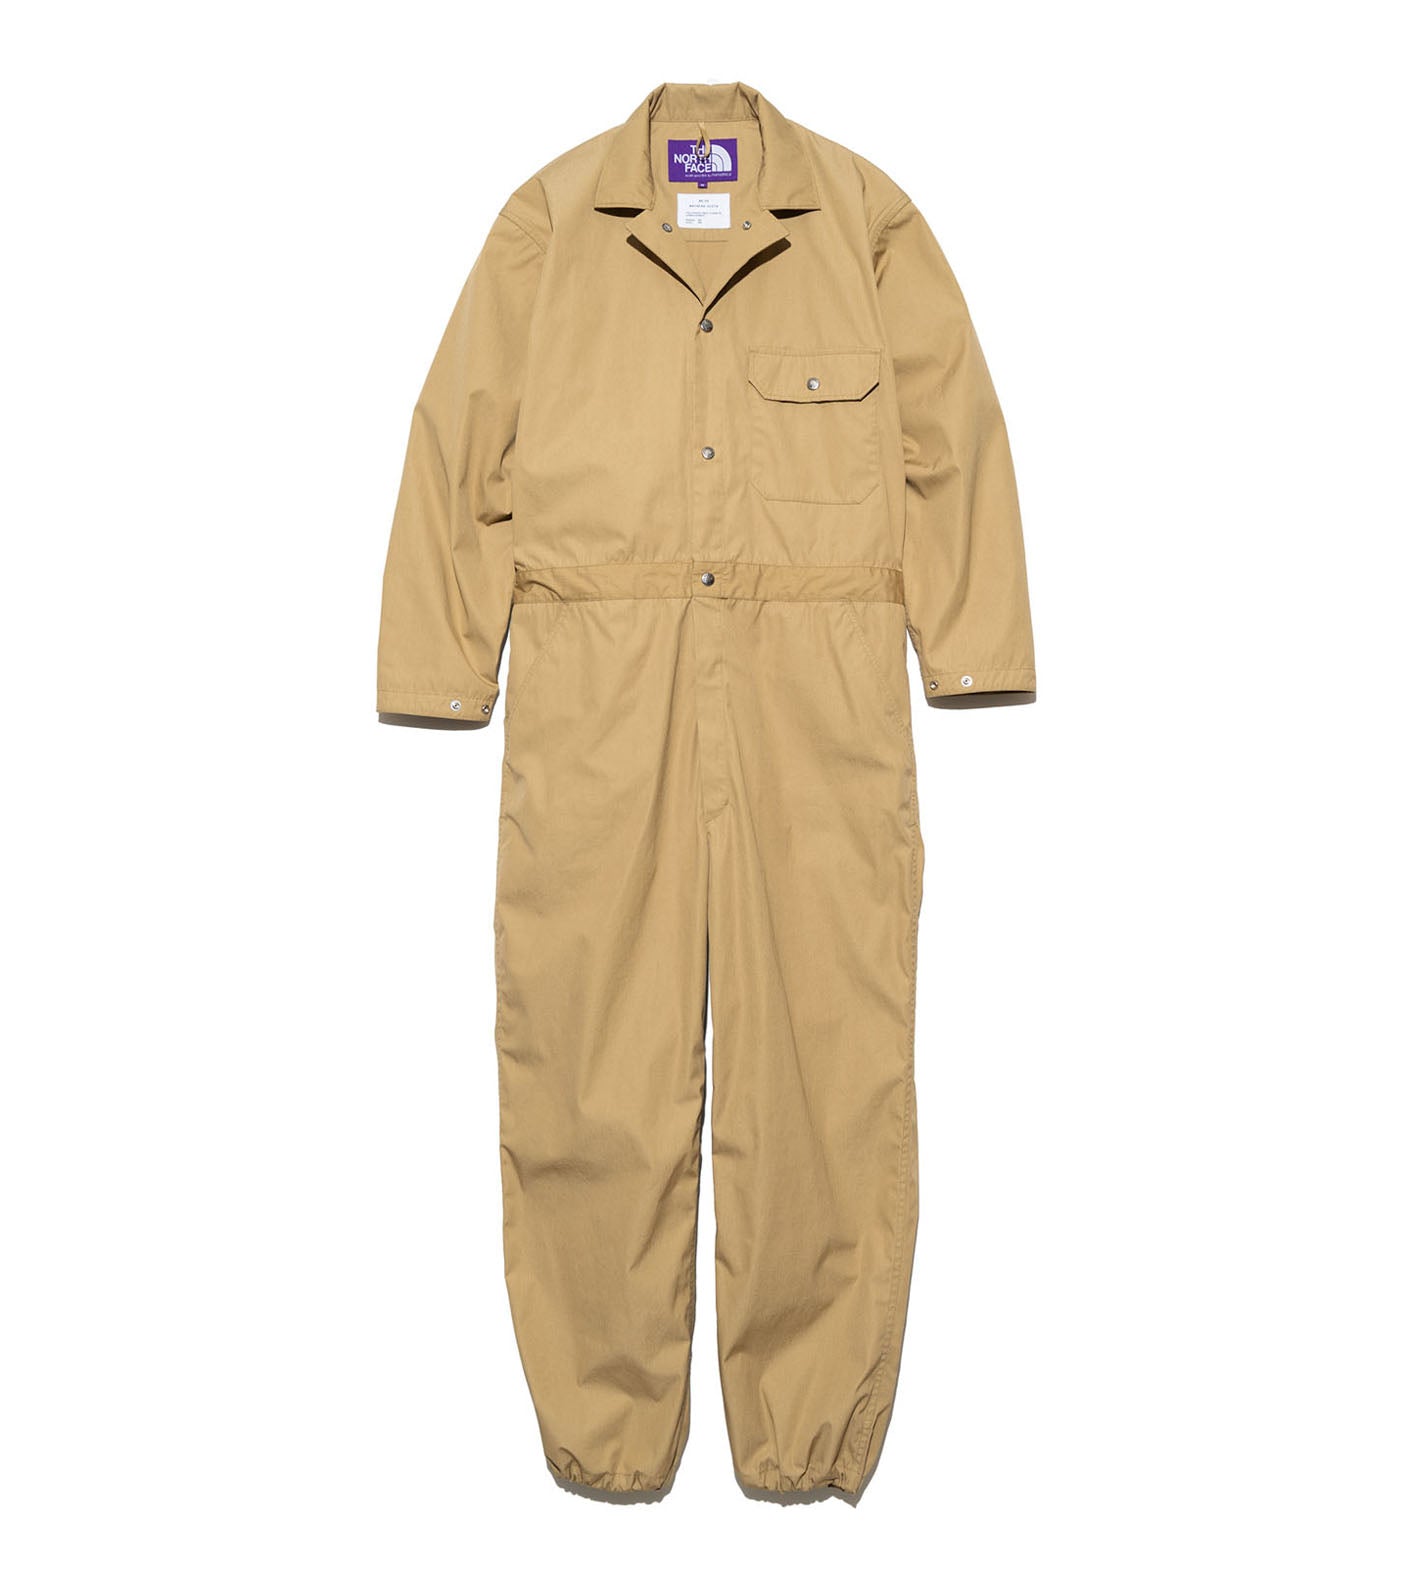 THE NORTH FACE PURPLE LABEL 65/35 Field All In One